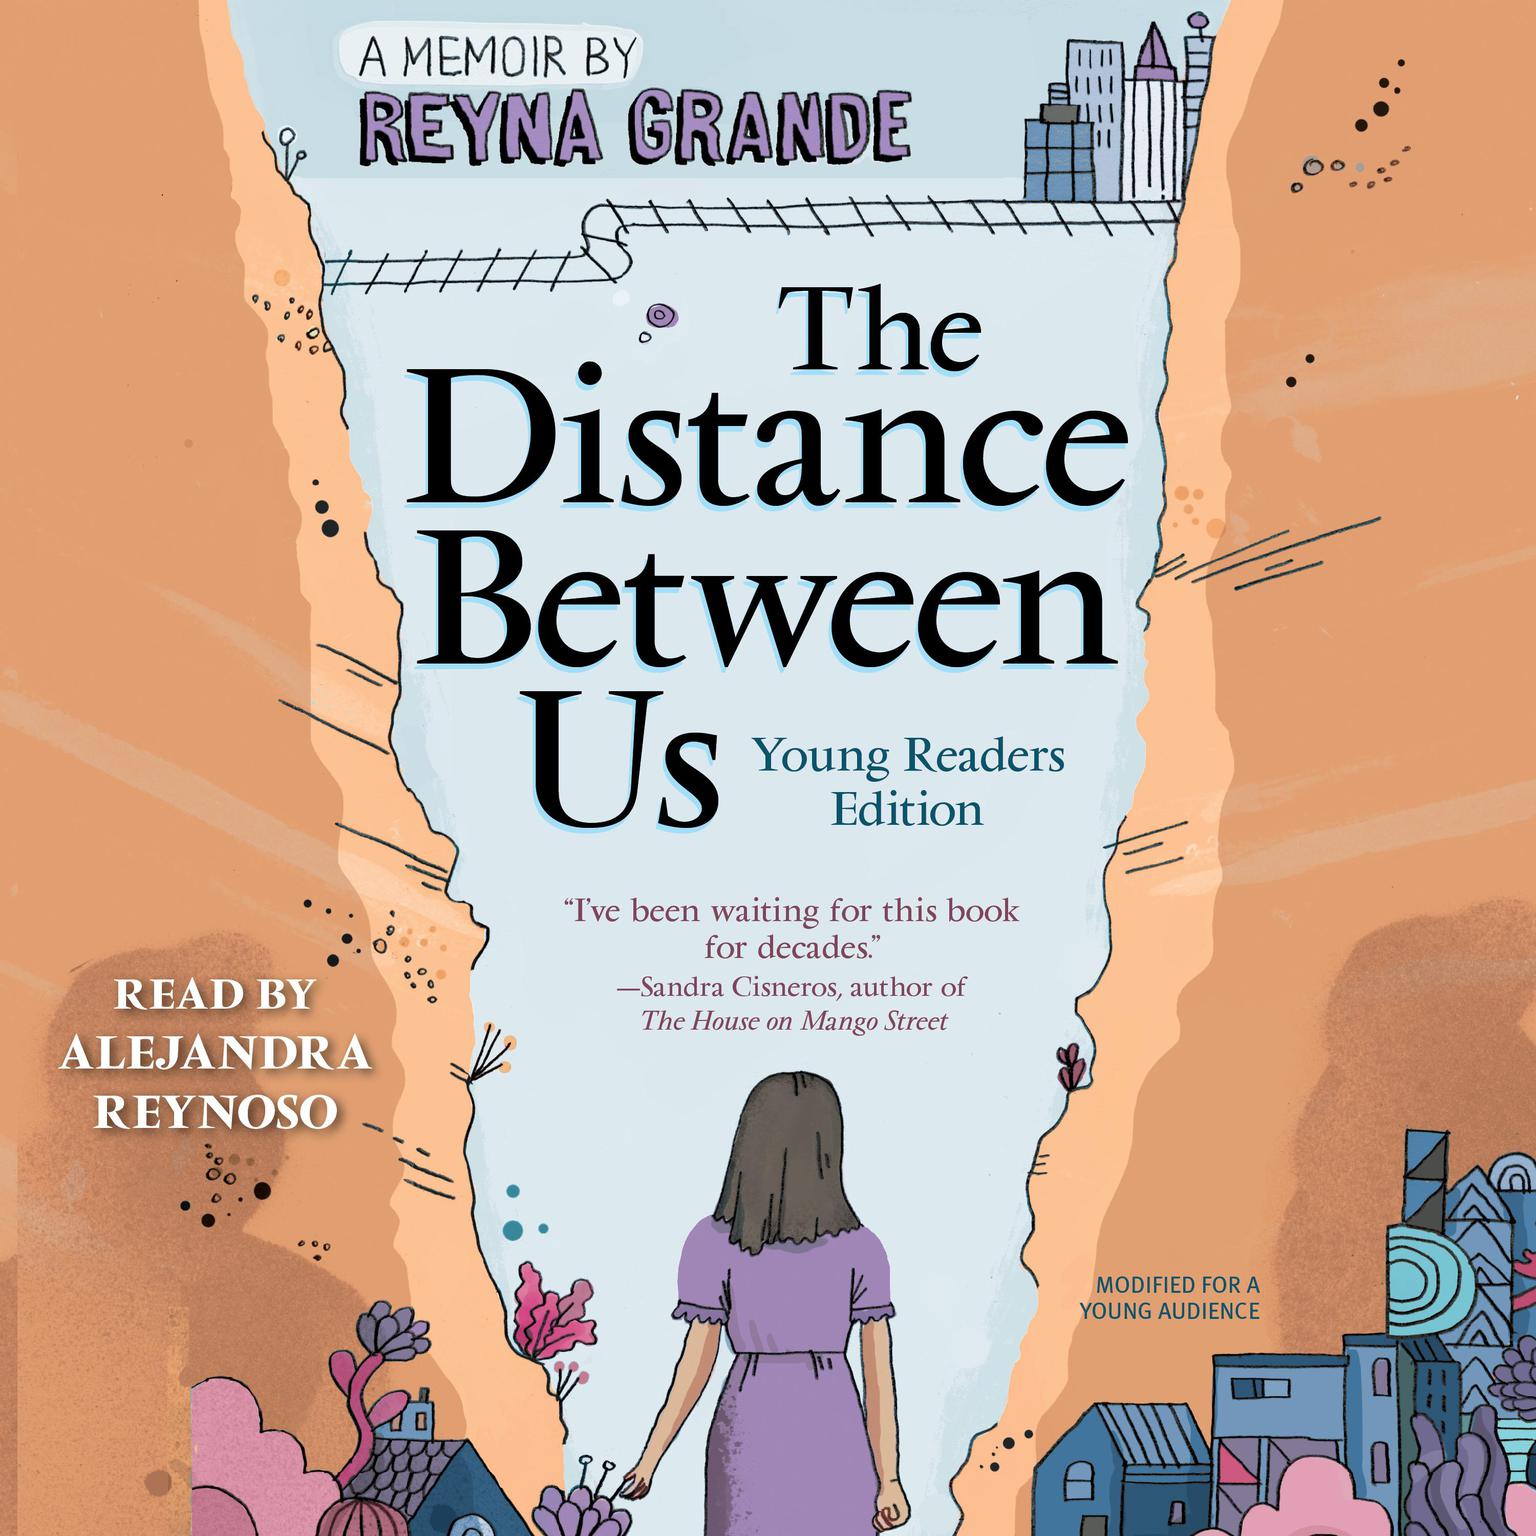 The Distance Between Us: Young Readers Edition Audiobook, by Reyna Grande